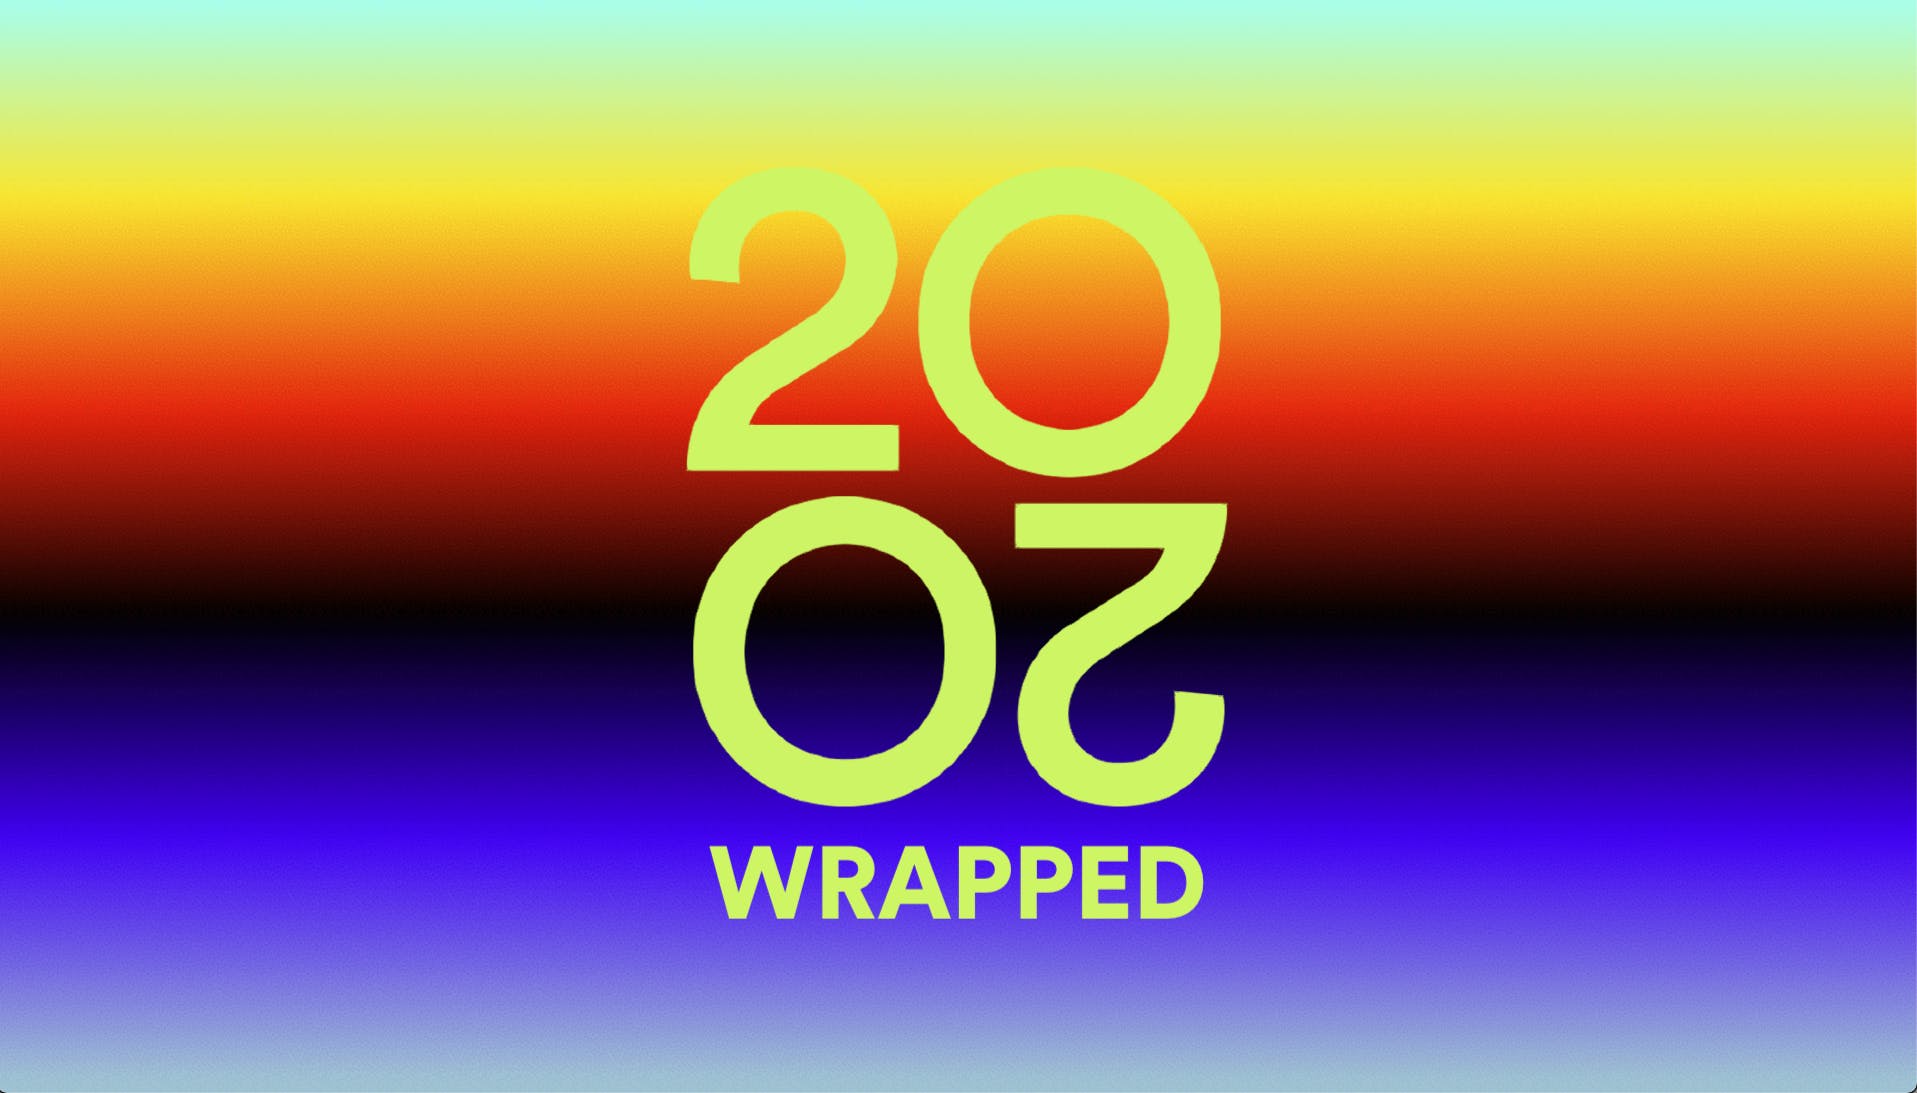 2020 Wrapped by Spotify - The songs you loved most this year, all wrapped up